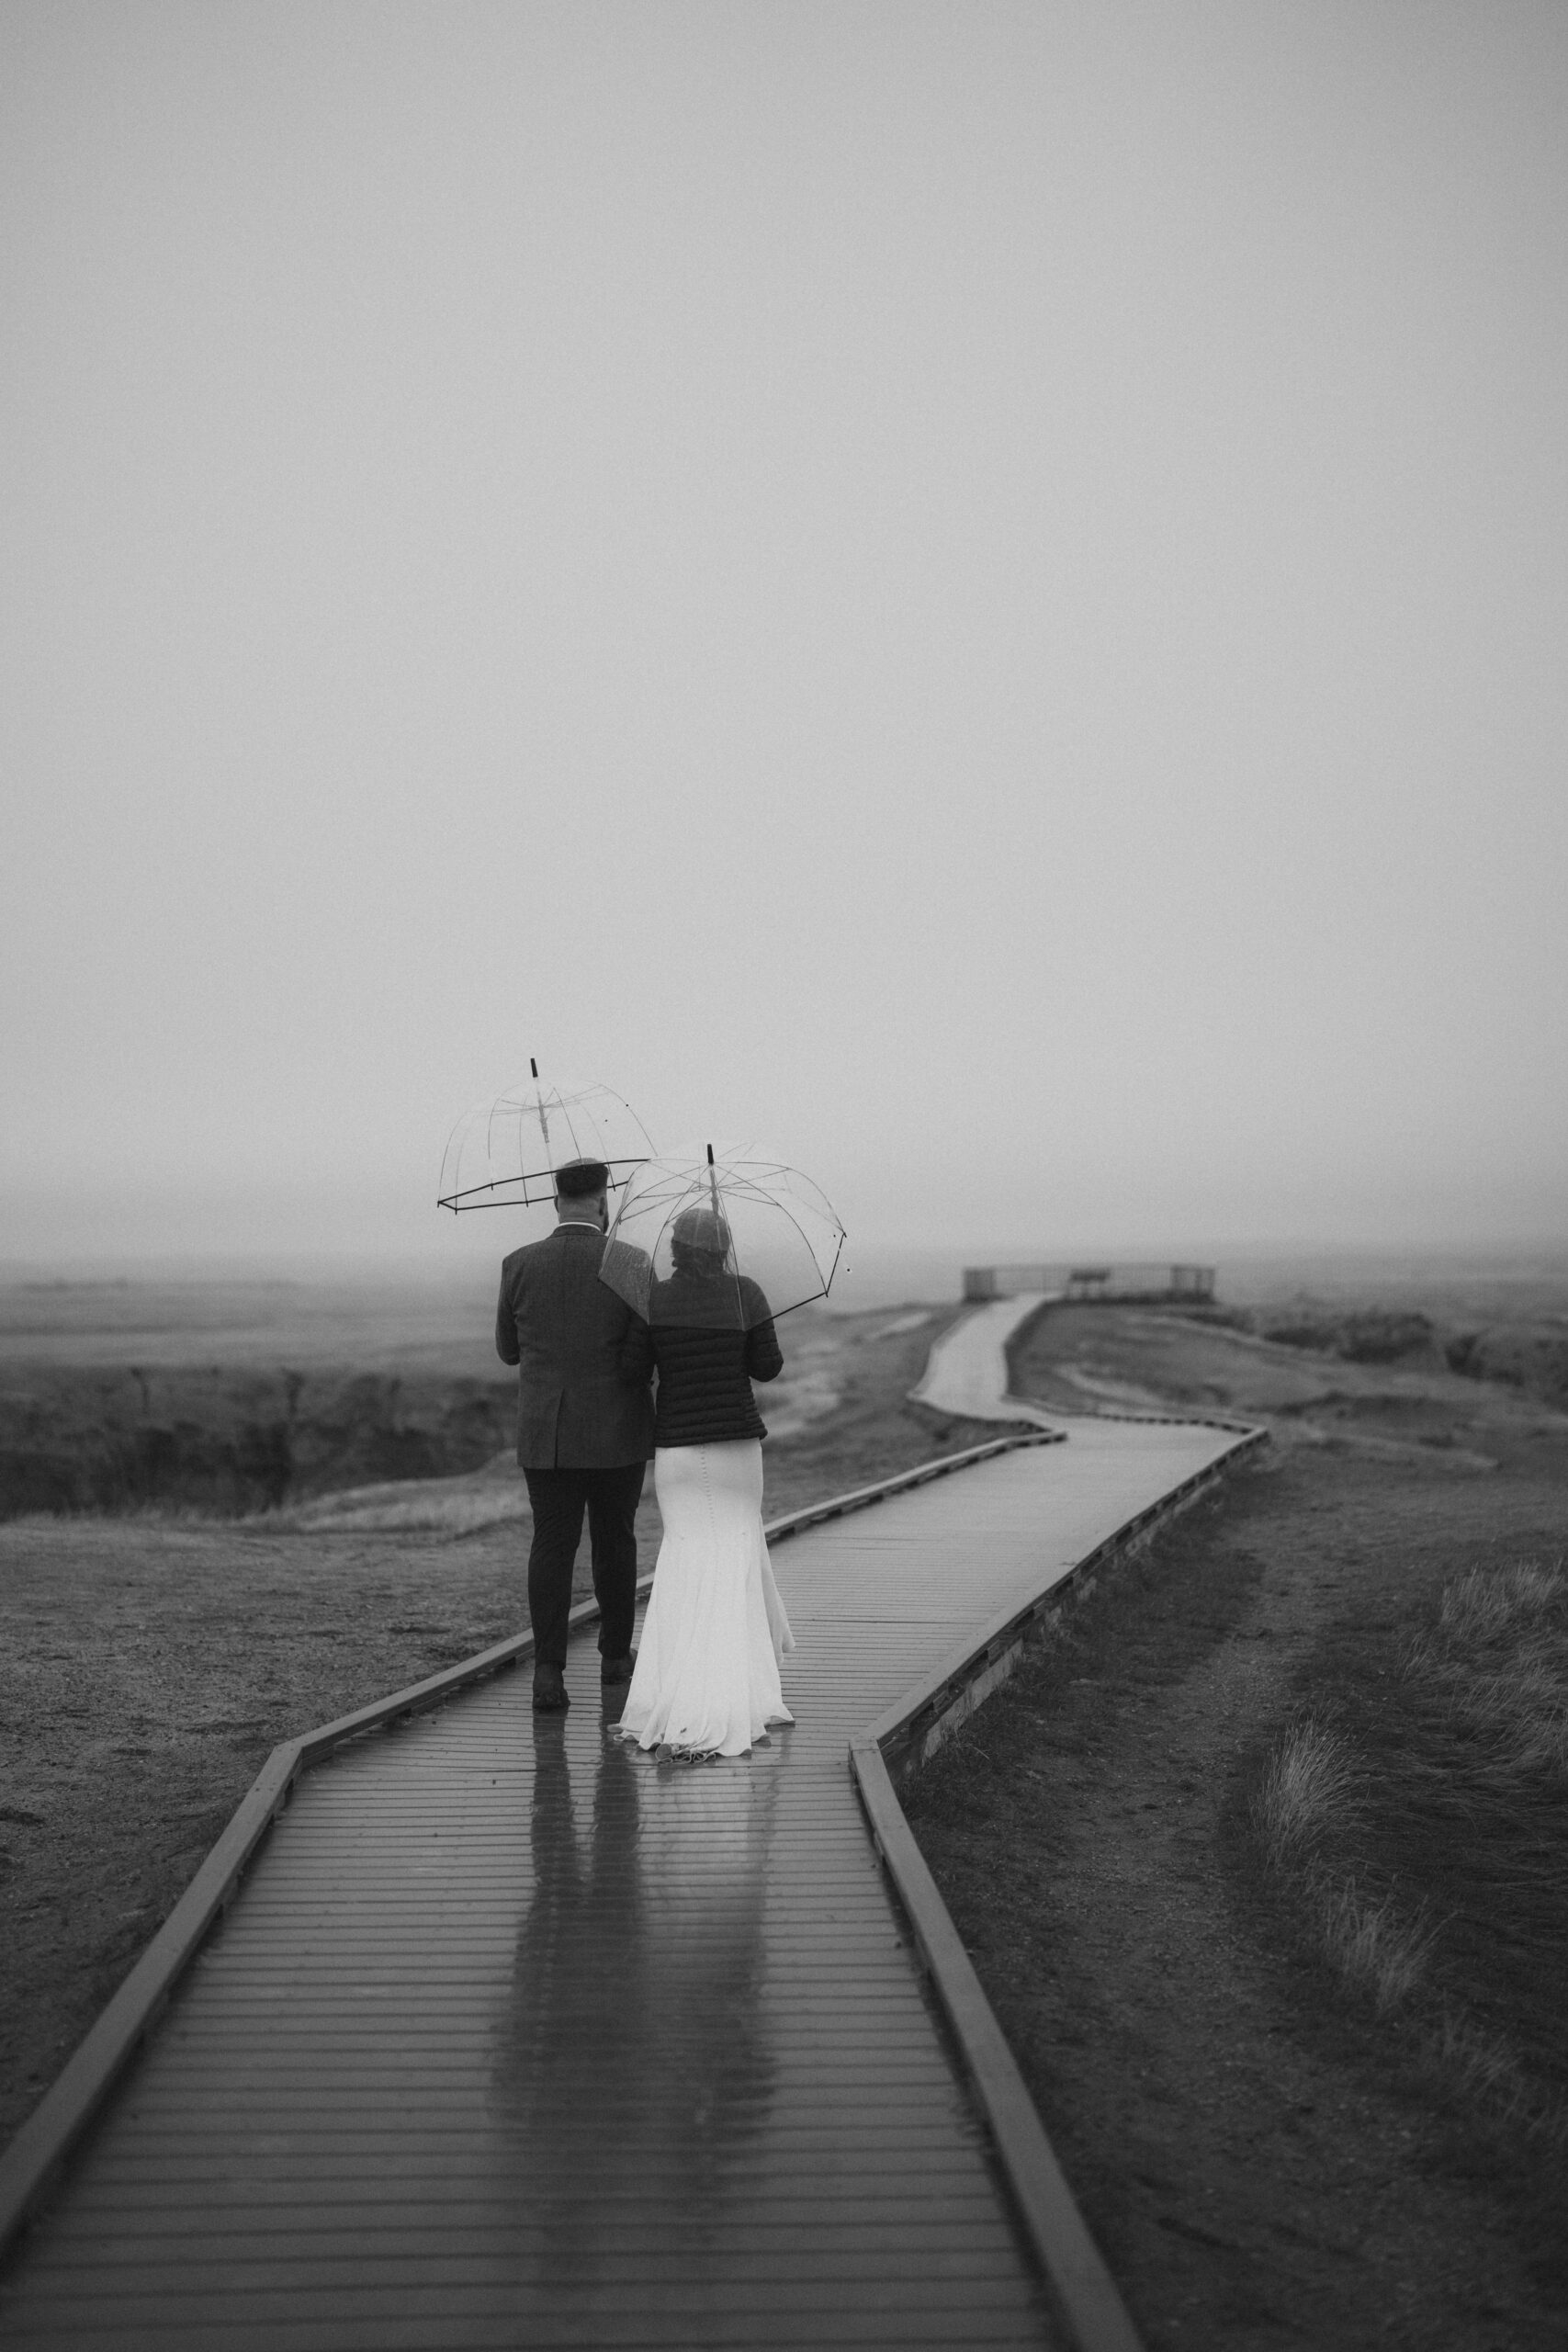 A couple walks side by side in the rain while holding umbrellas in Badlands National Park